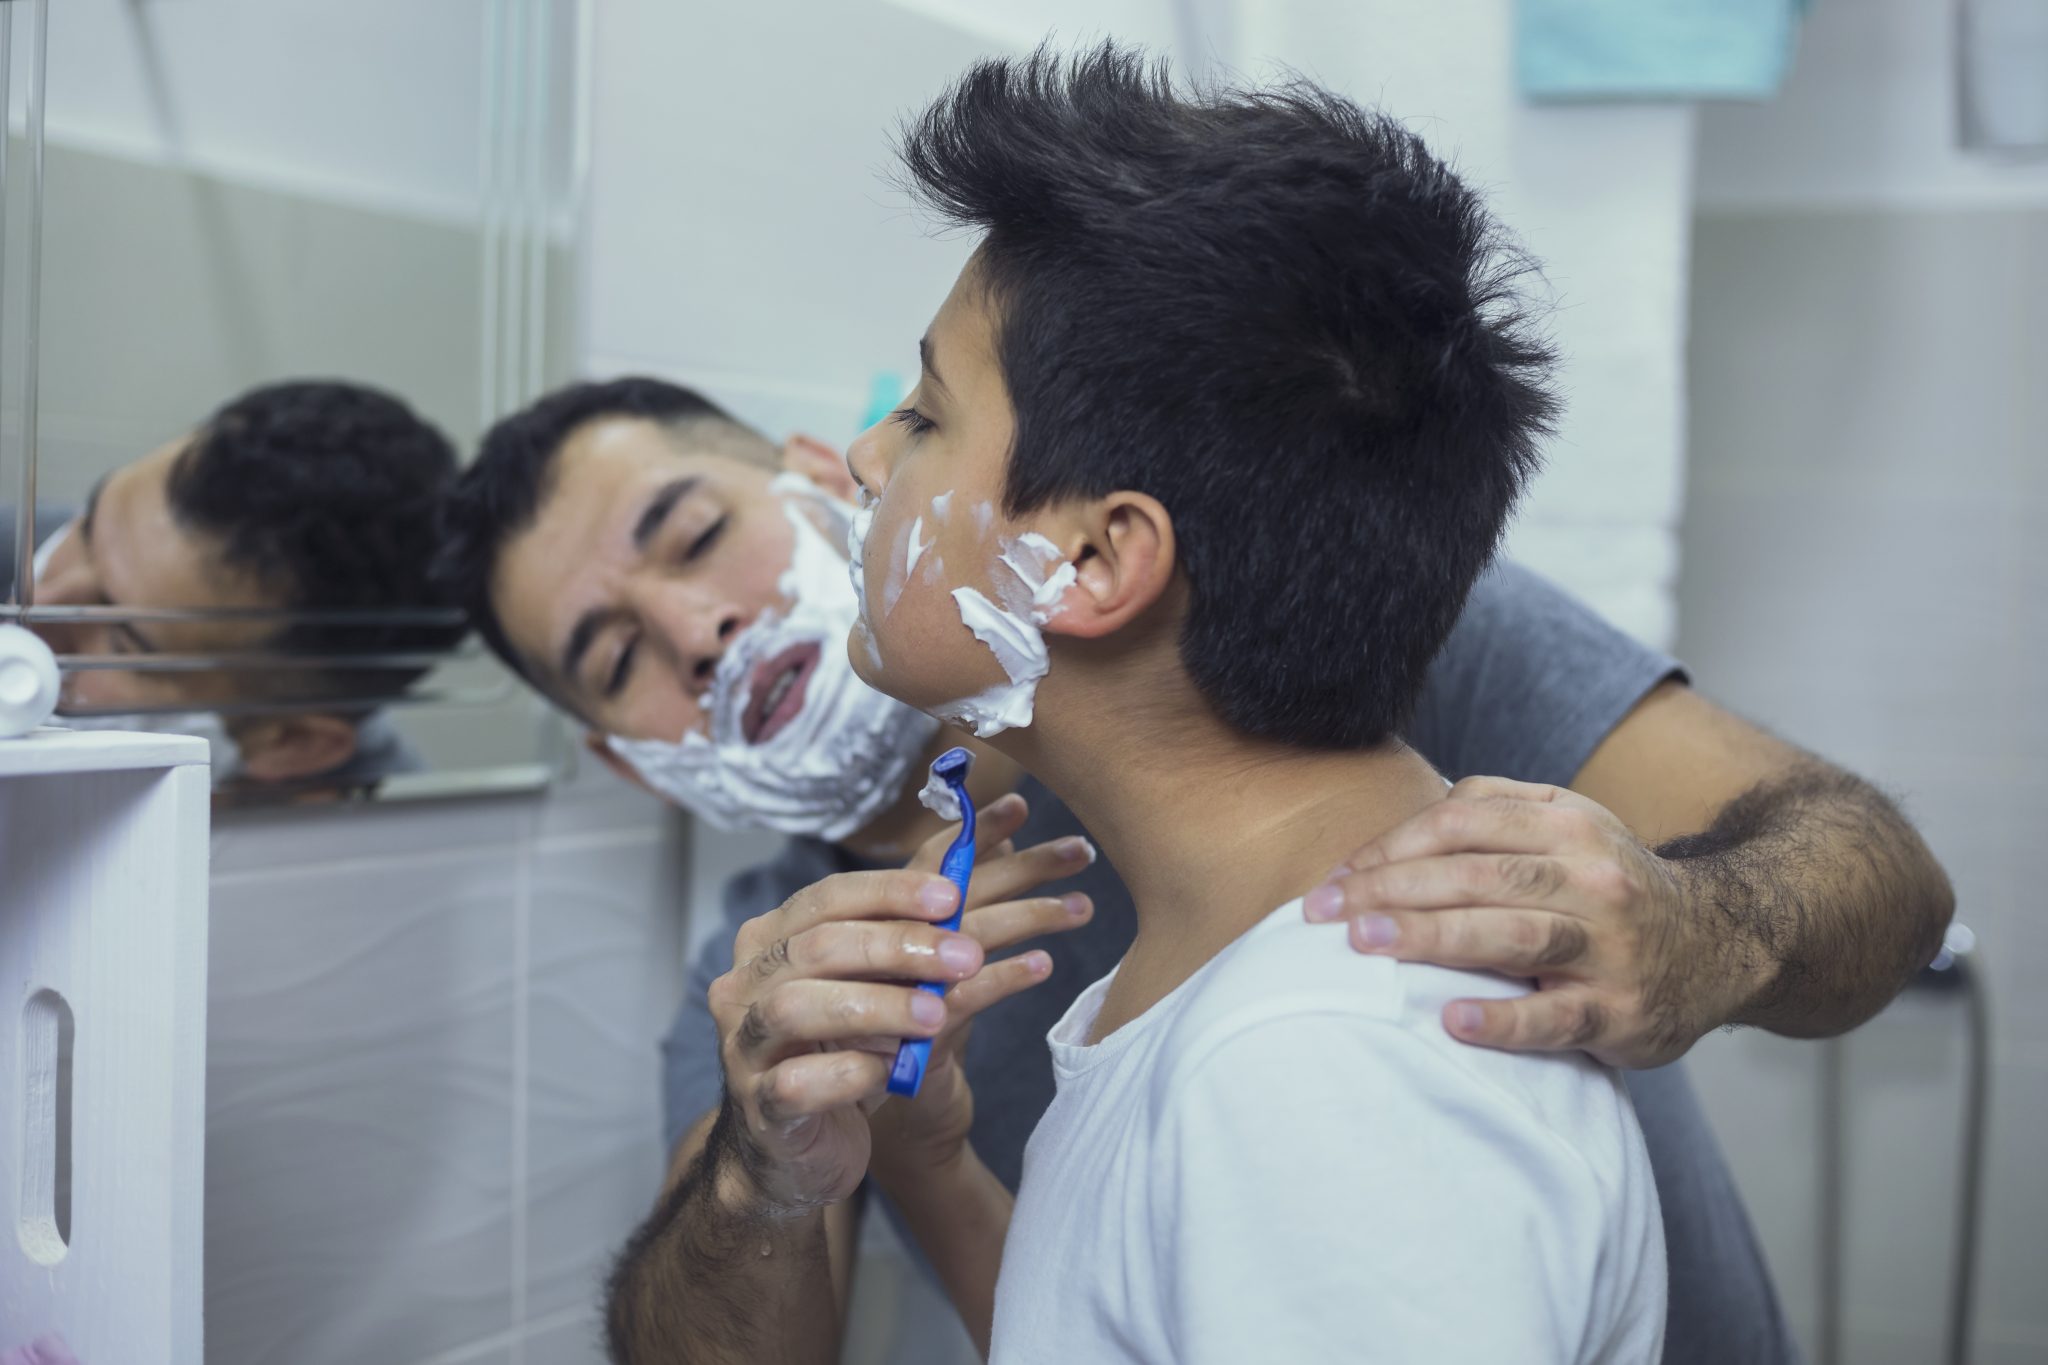 New Gillette ad shows dad teaching transgender son to shave and it’s just beautiful